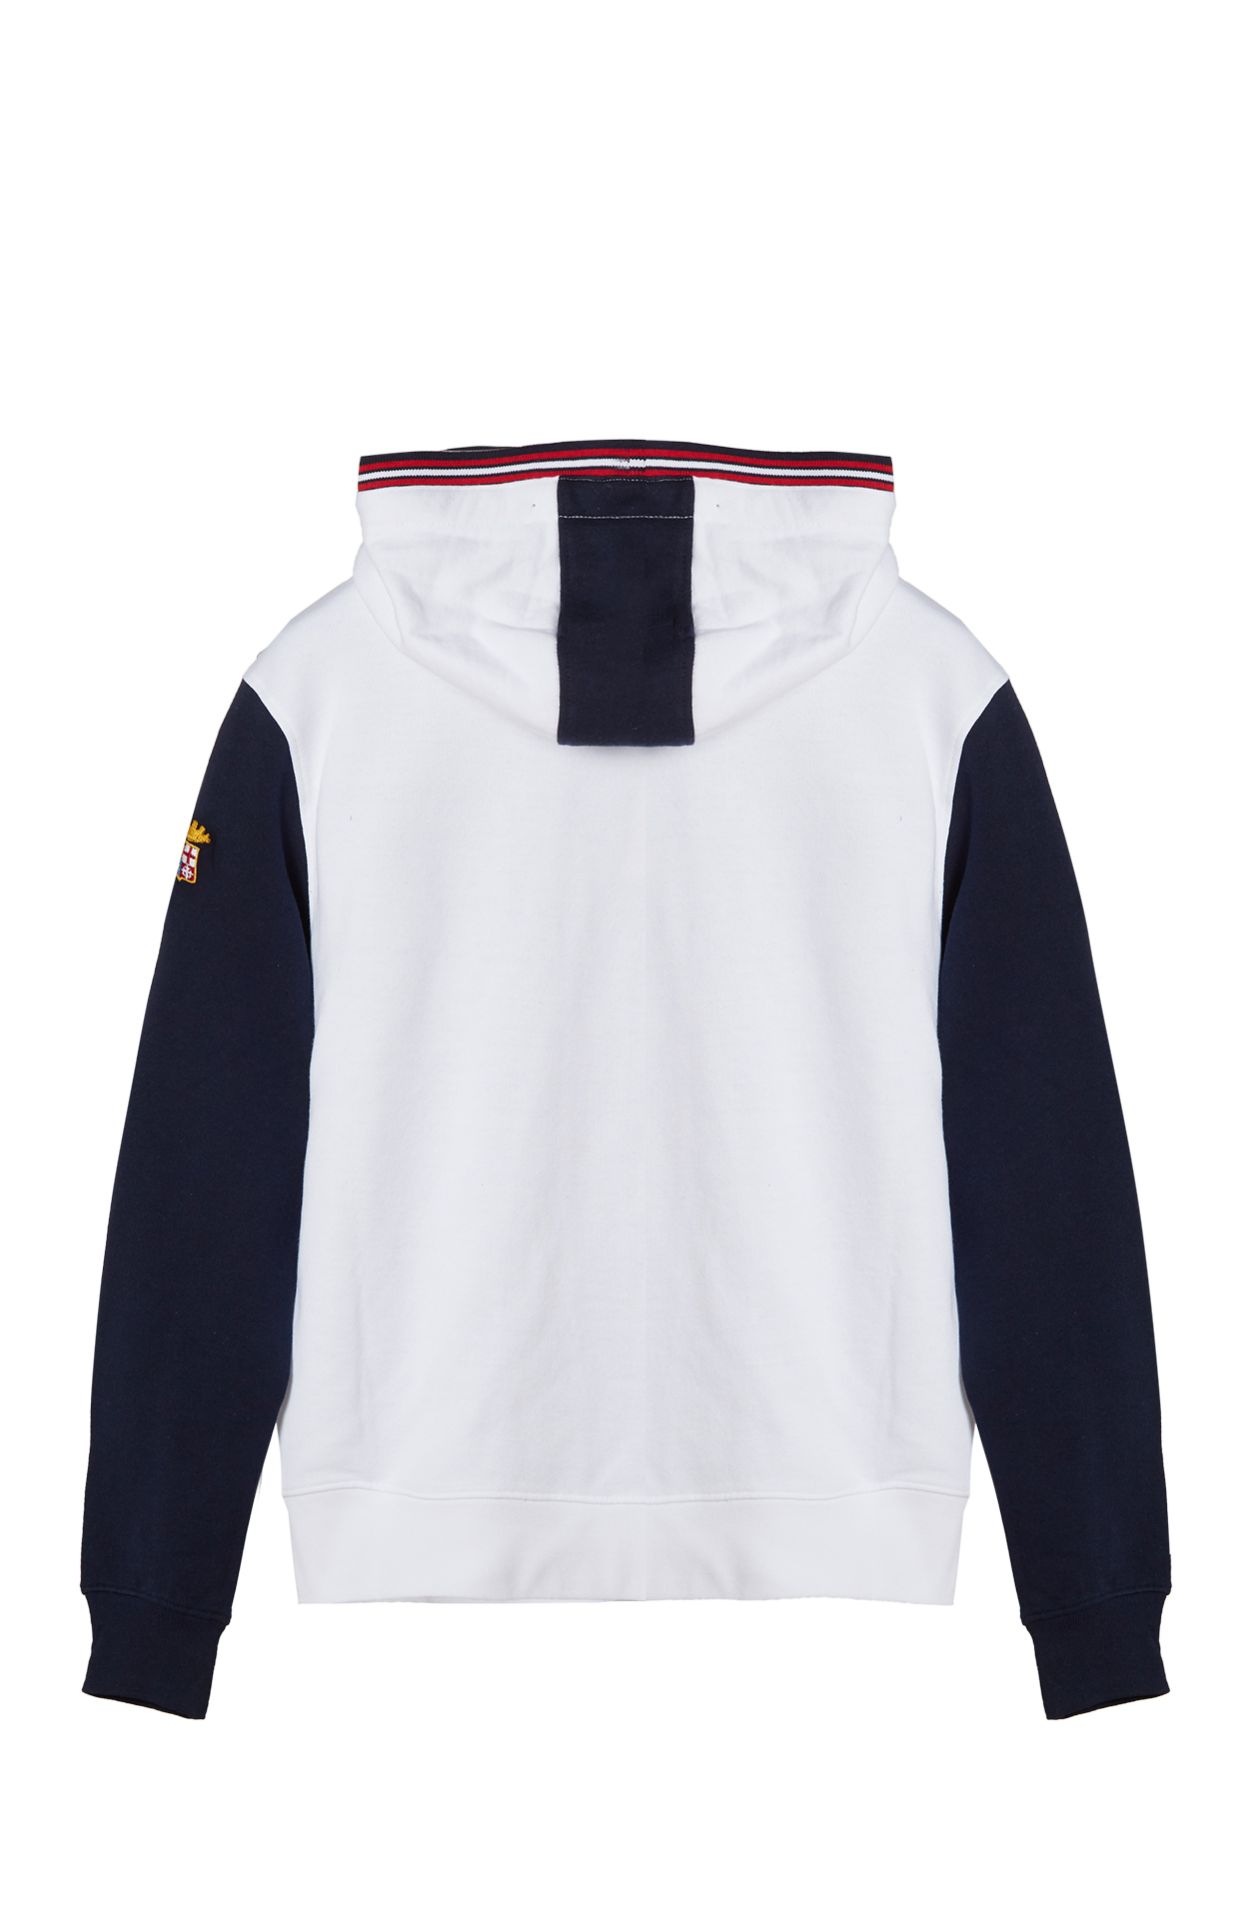 TWO-TONE HOODED SWEATSHIRT IN PURE COTTON FRENCH TERRY